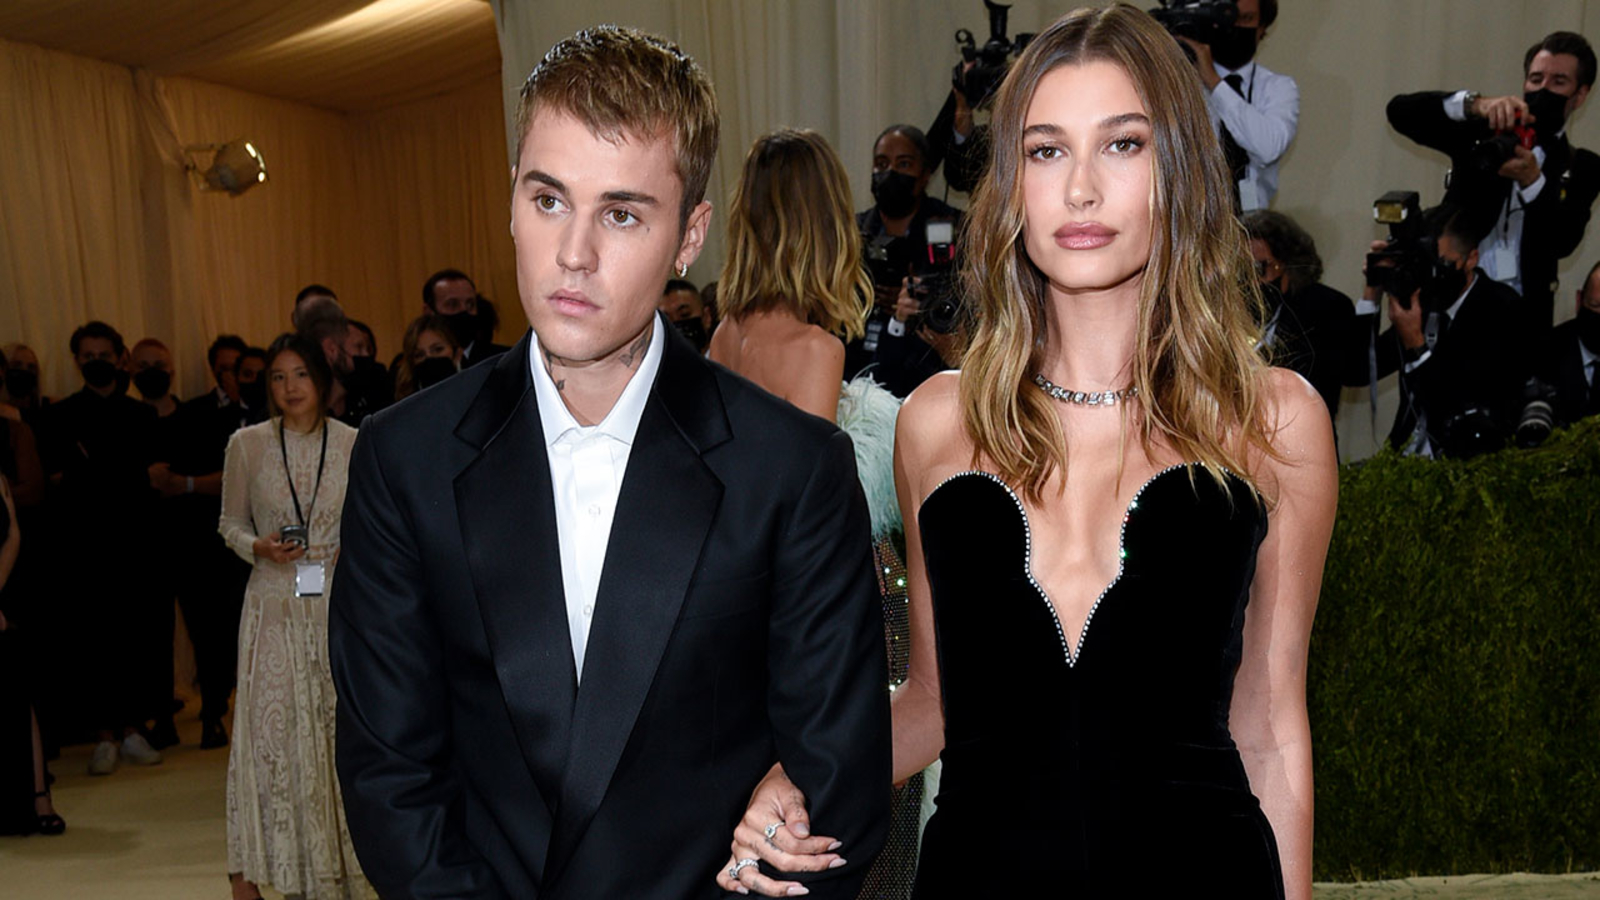 Baby, baby, baby: Justin and Hailey Bieber expecting their first child together